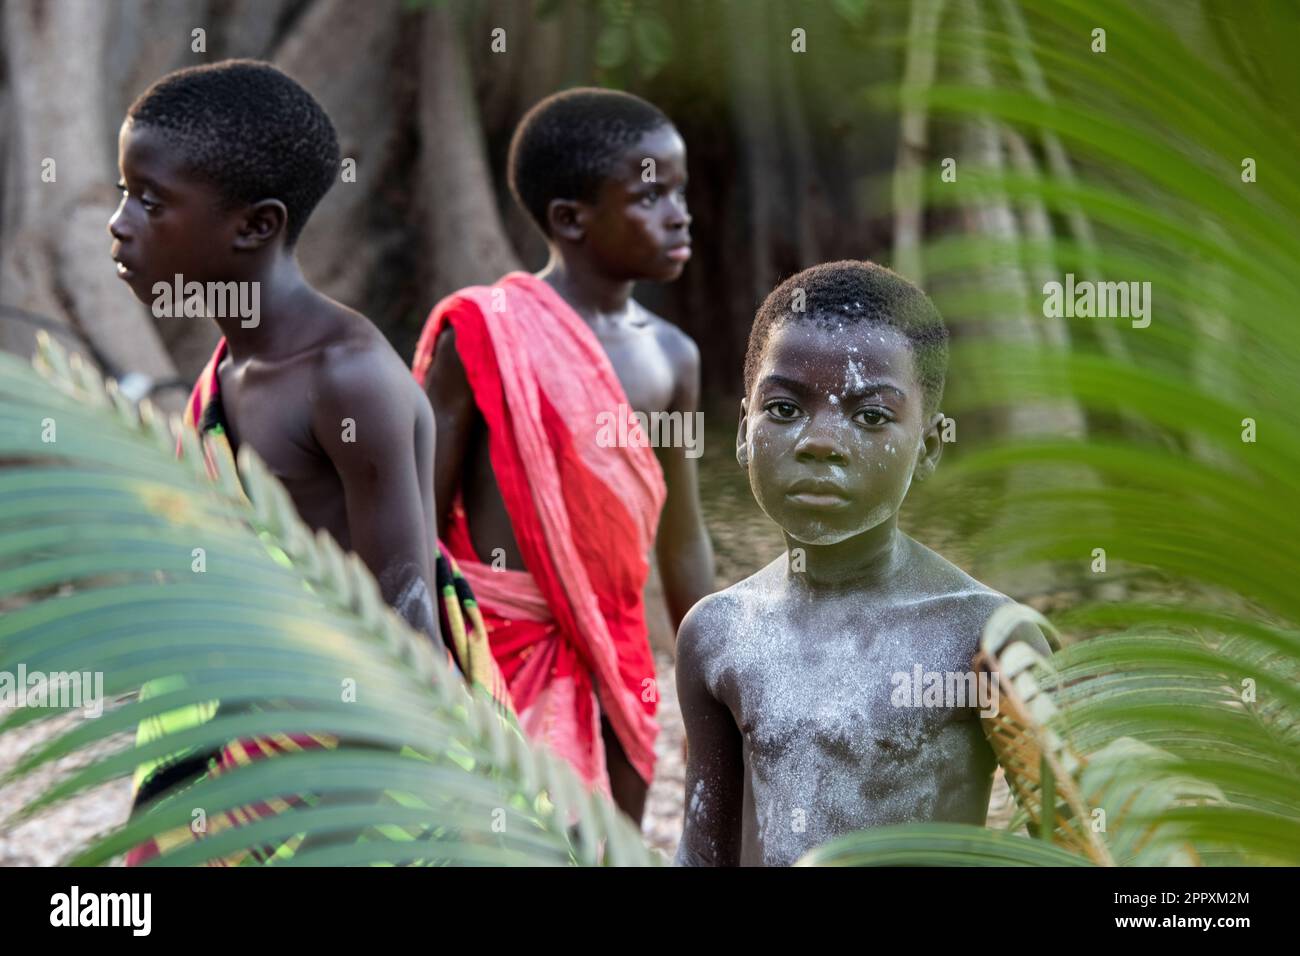 Little African boy in traditional body paint of local tribe standing with friends near big tropical tree leafs in forest Stock Photo